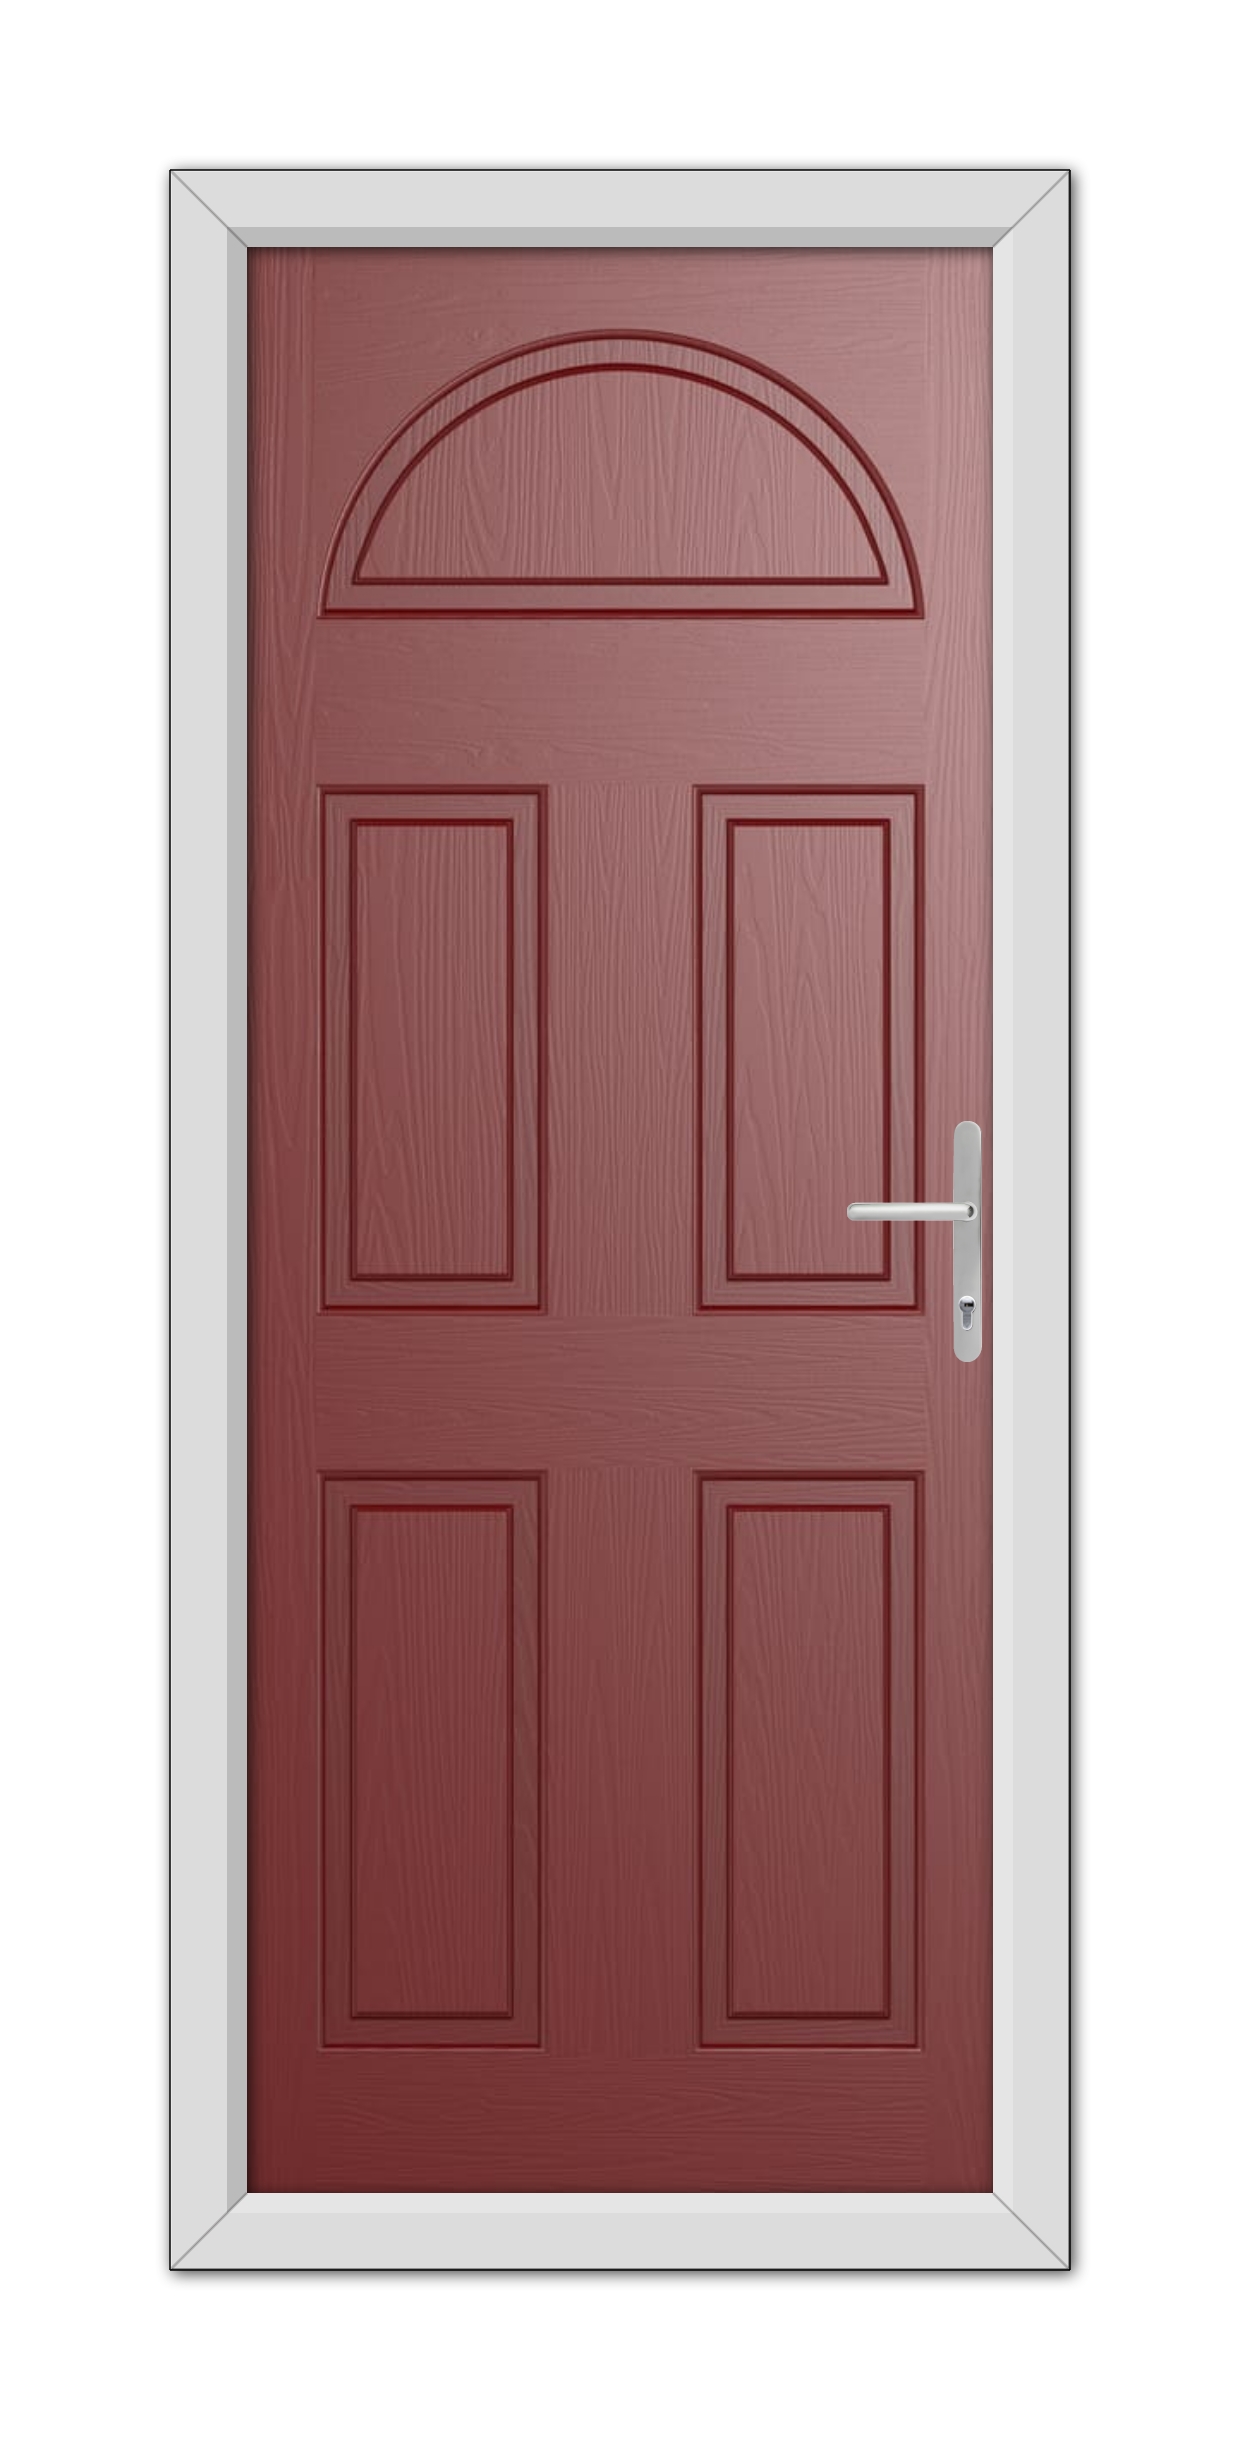 A Red Winslow Solid Composite Door 48mm Timber Core with six panels and a semicircle window at the top, framed in white, featuring a modern handle on the right side.